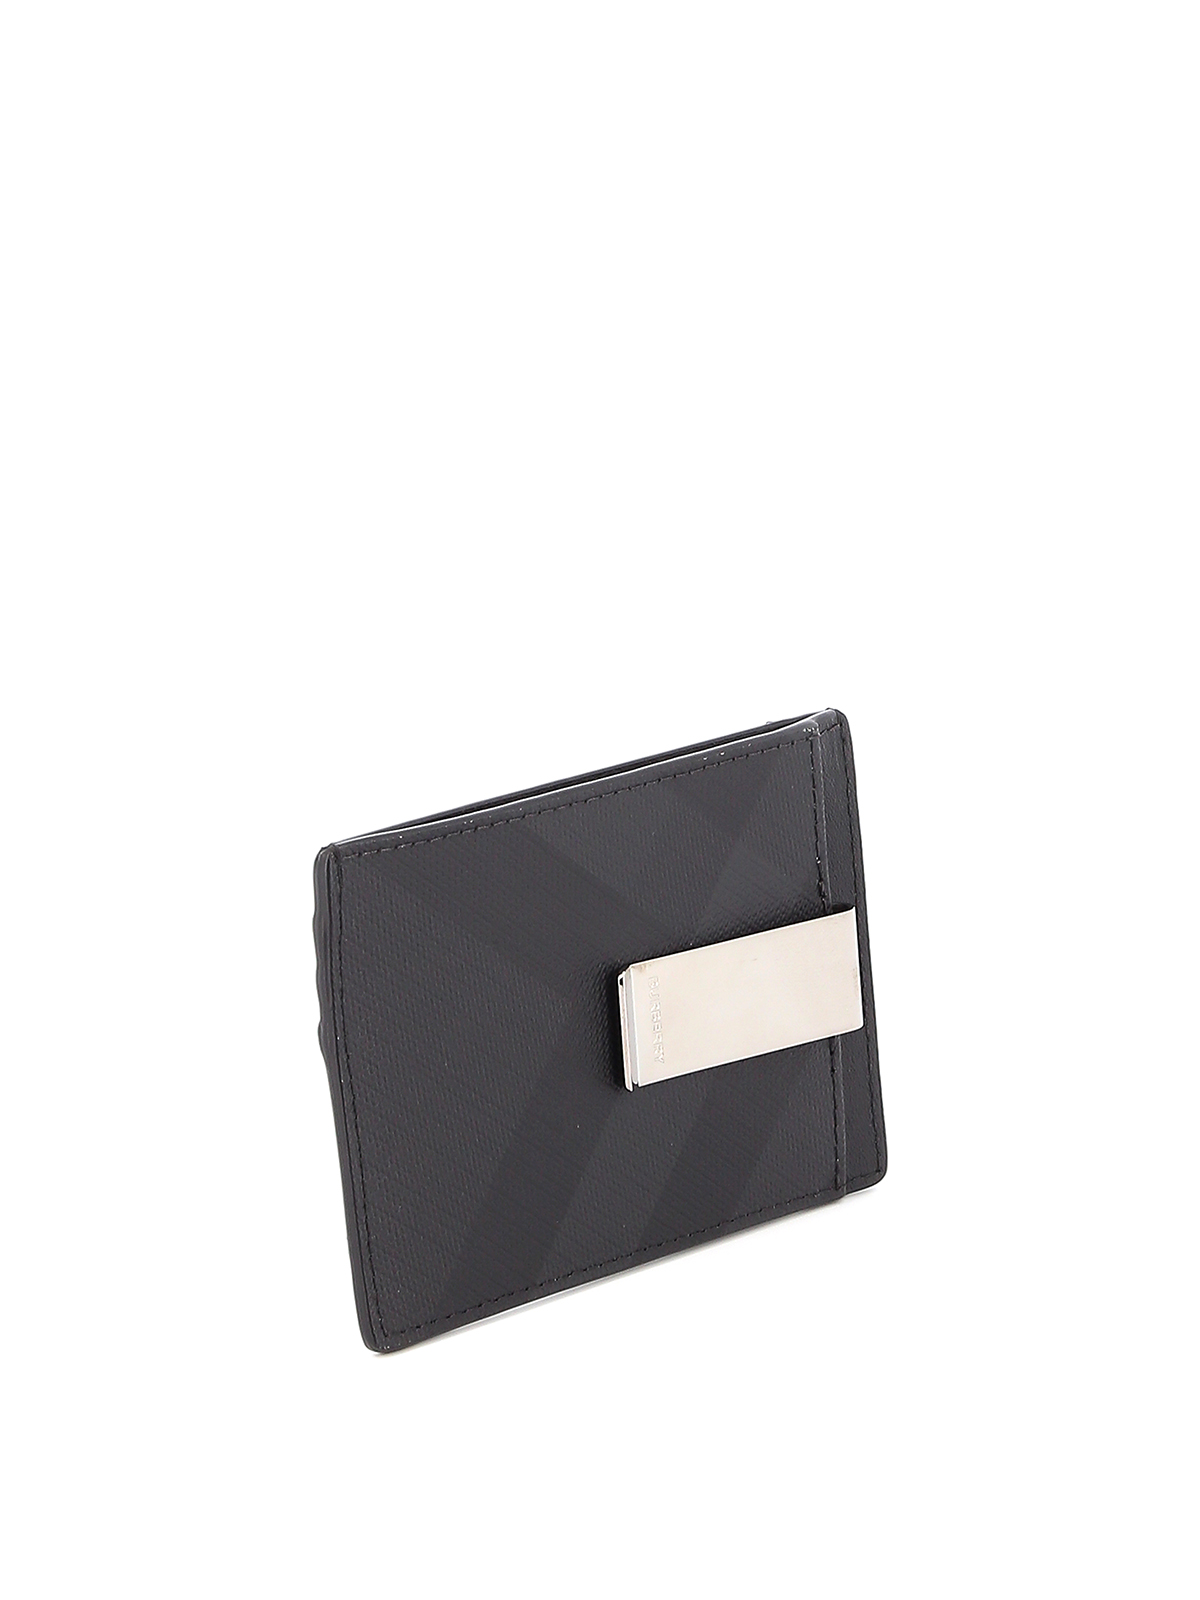 Burberry Check Card and Leather Card Holder with Money Clip Black